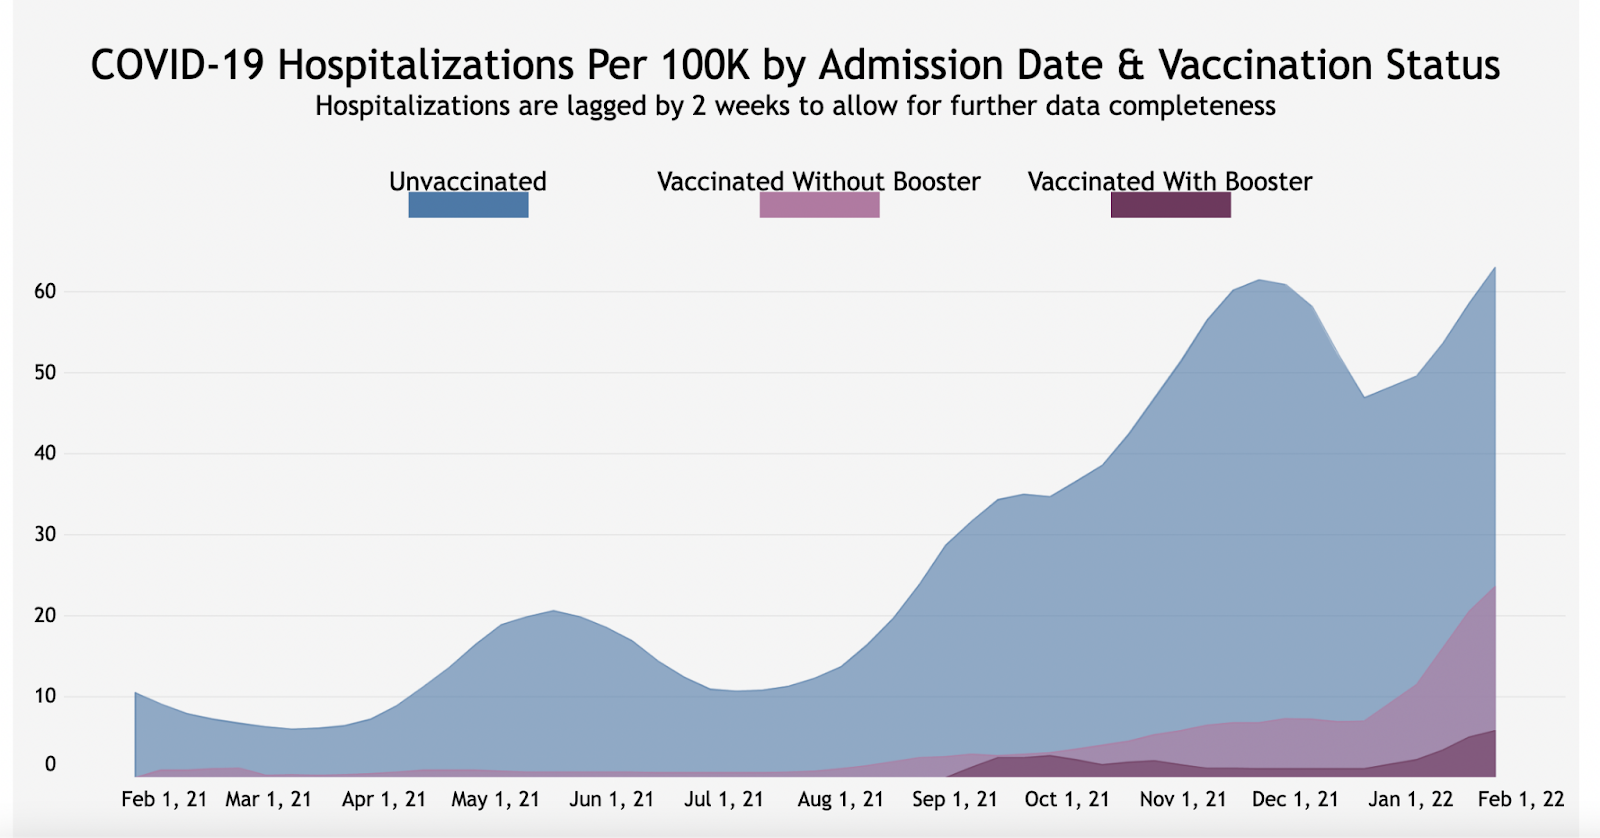 Screenshot of CO timeseries chart showing hospitalizations per 100k by admission date and vaccination status.